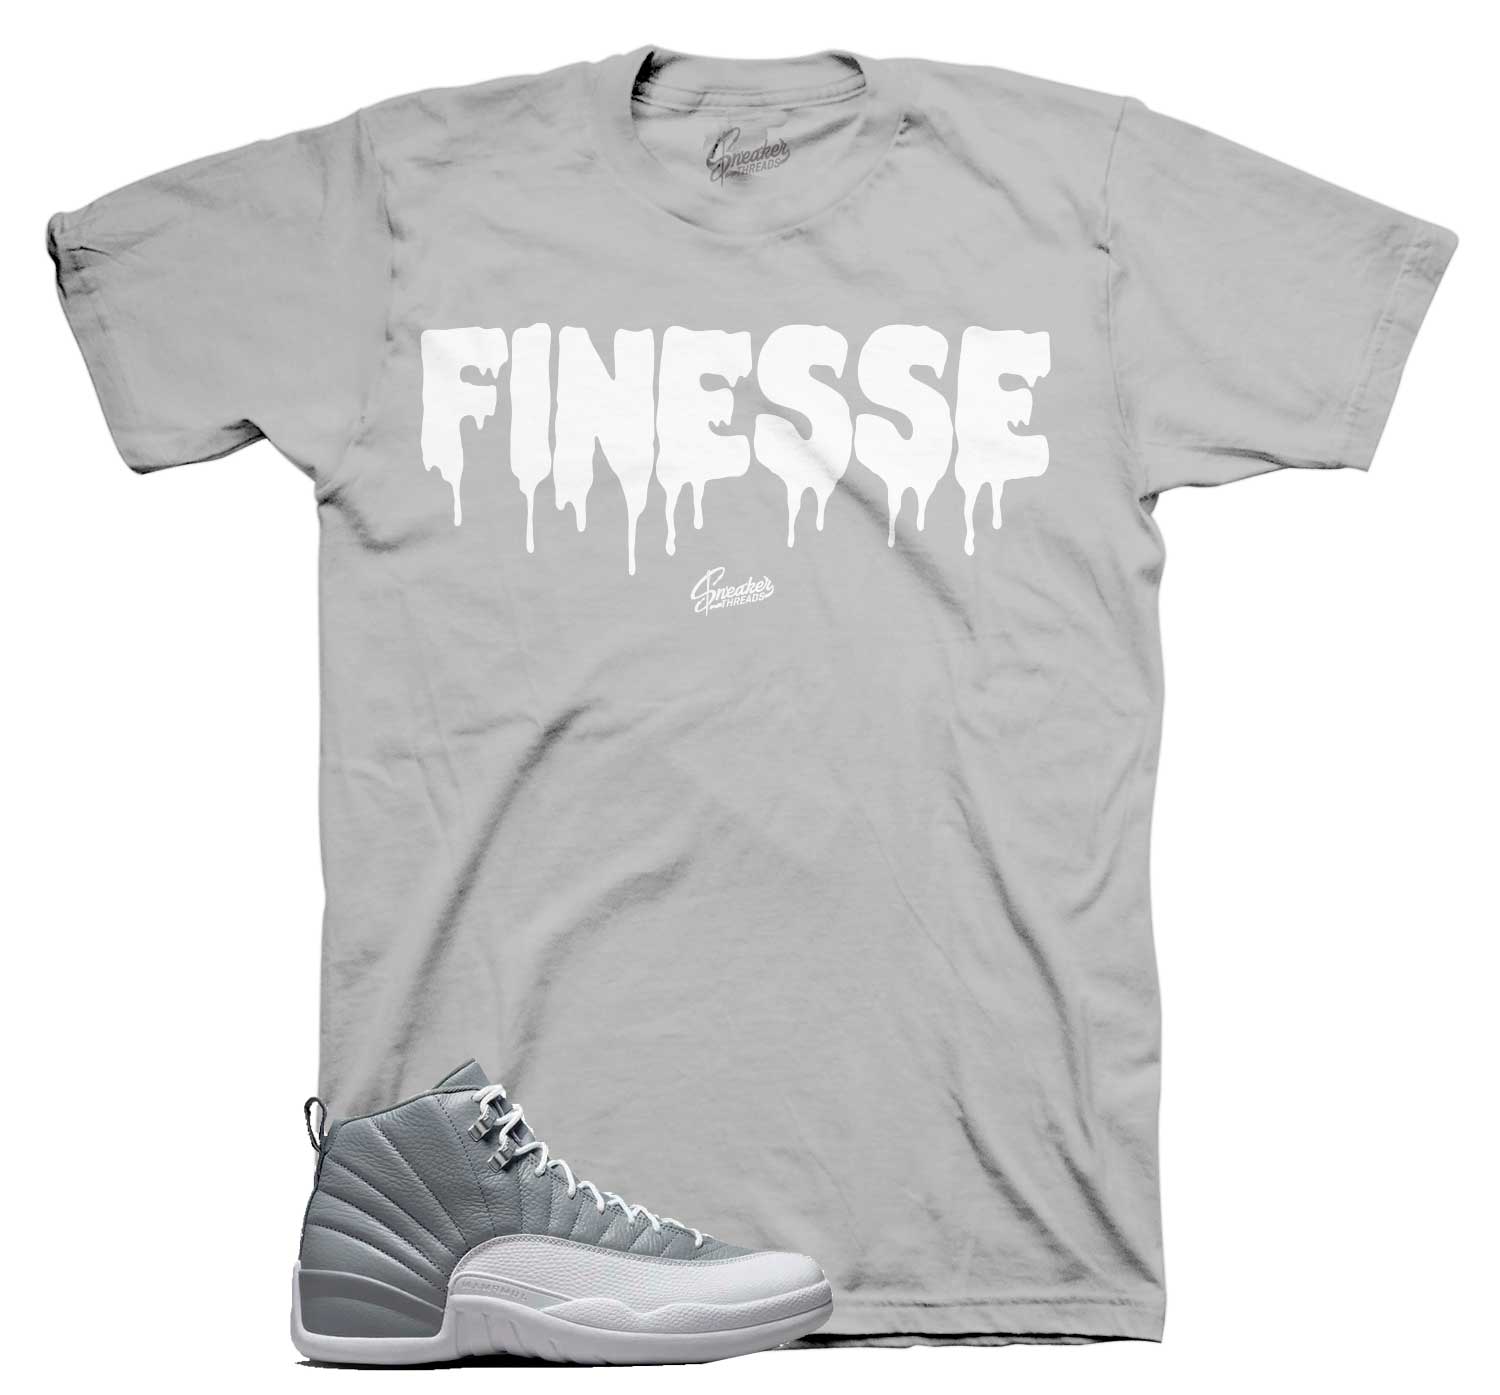 grey and white jordan 12 outfit